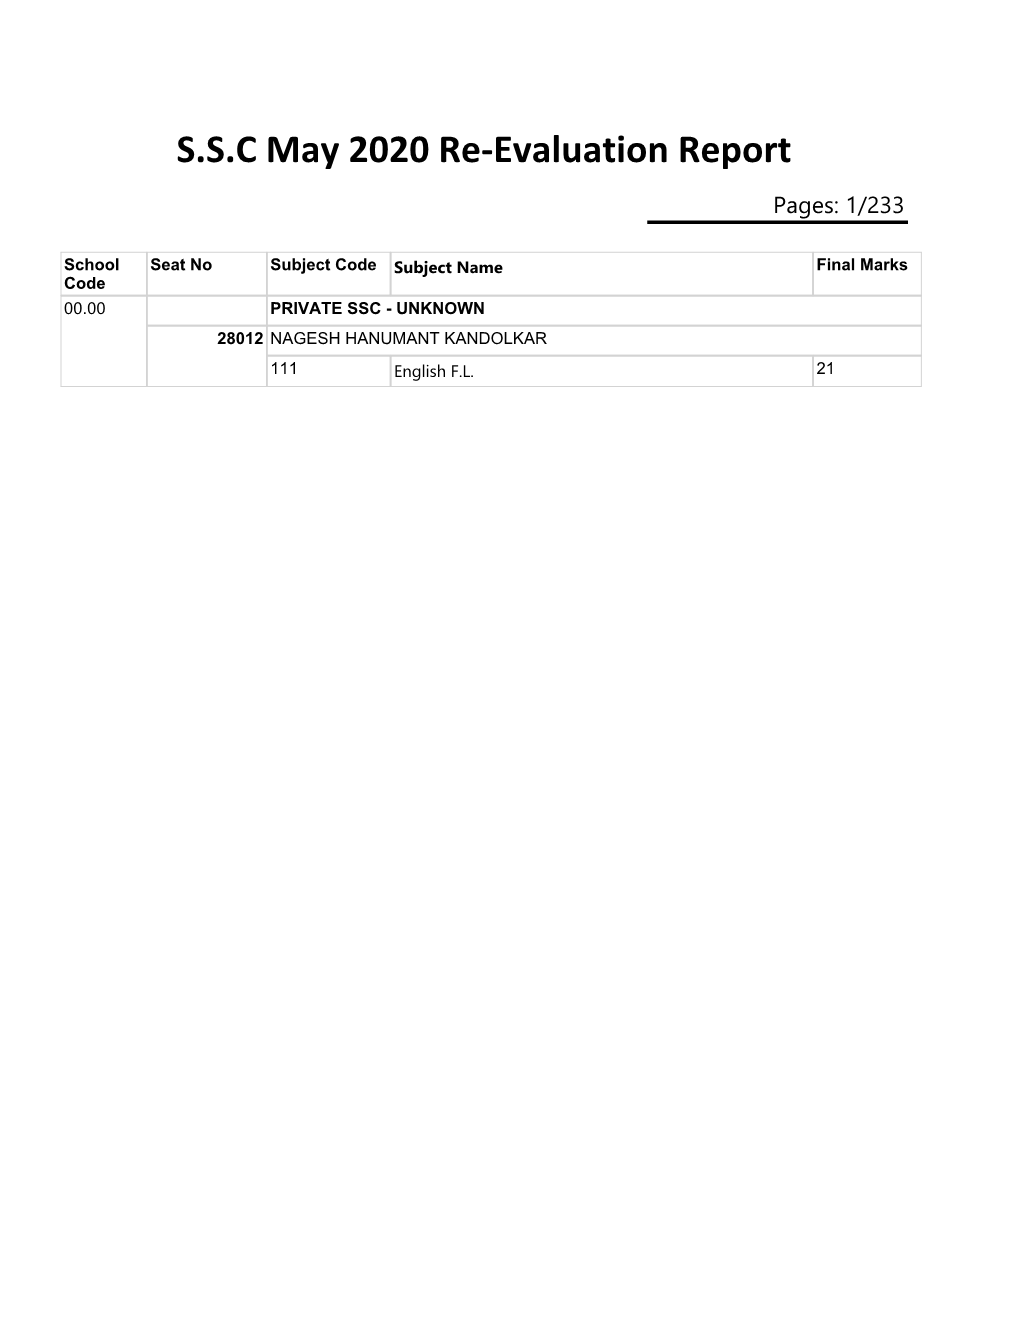 S.S.C May 2020 Re-Evaluation Report Pages: 1/233